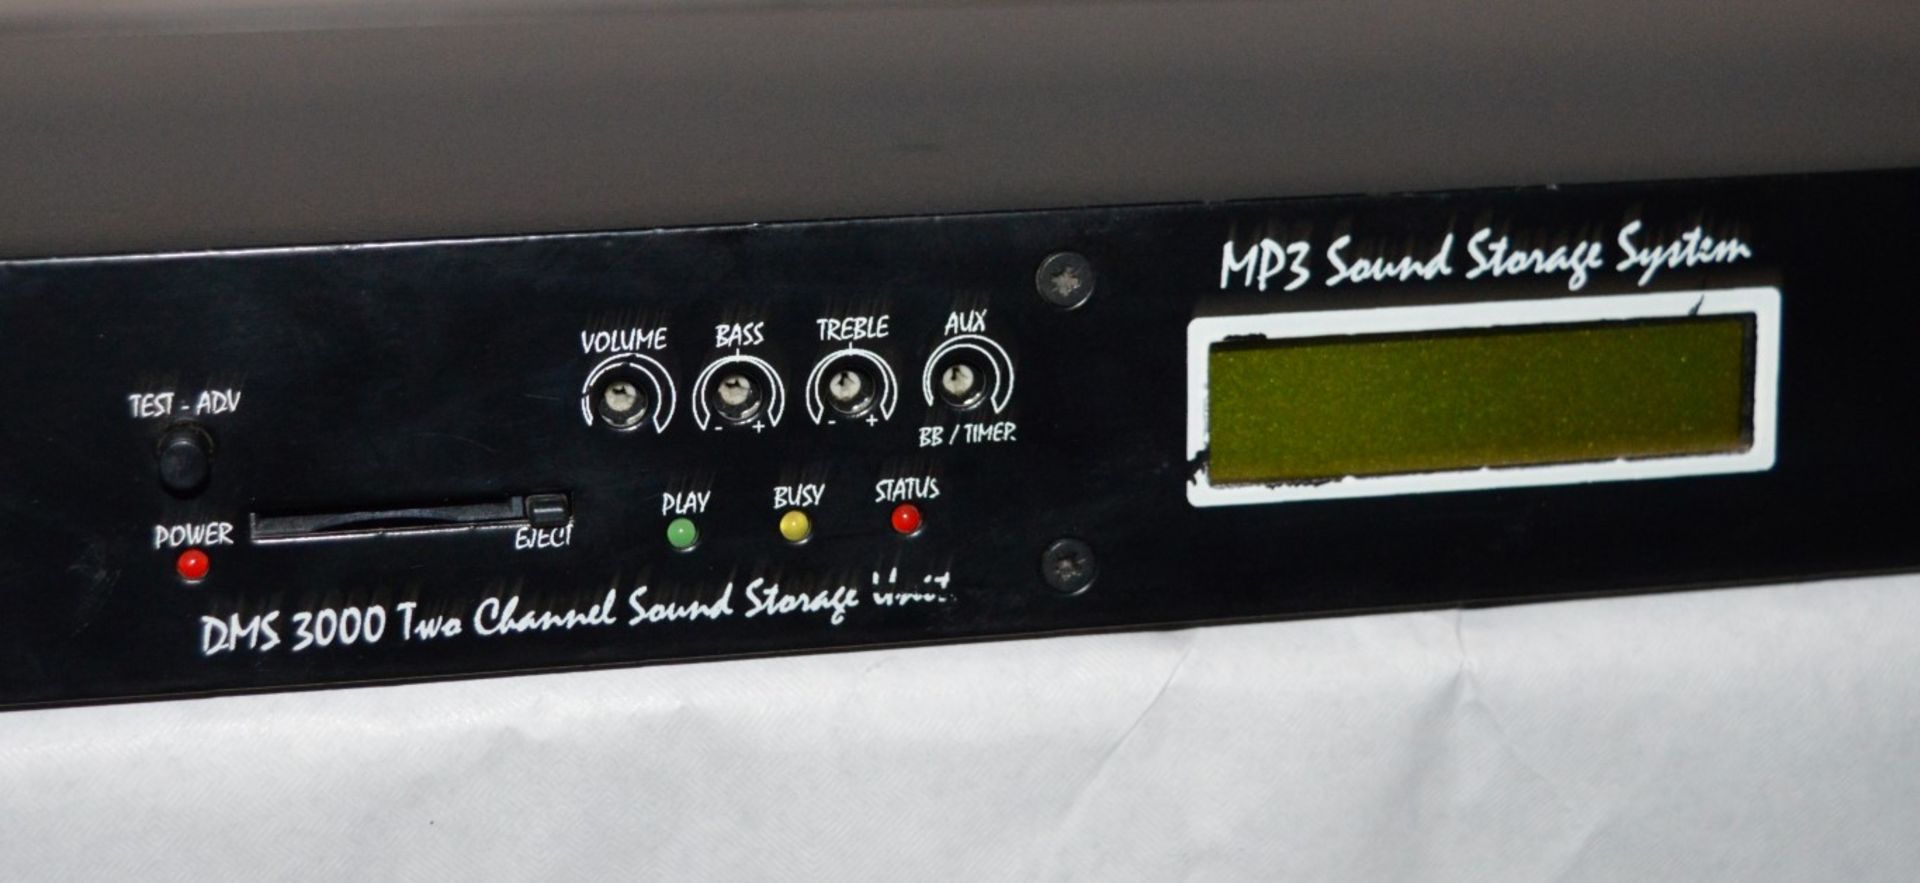 1 x DMS 3000 1U MP3 Sound Store Storage System With SD Card Slot - Golding Audio Ltd - Suited to - Image 4 of 4